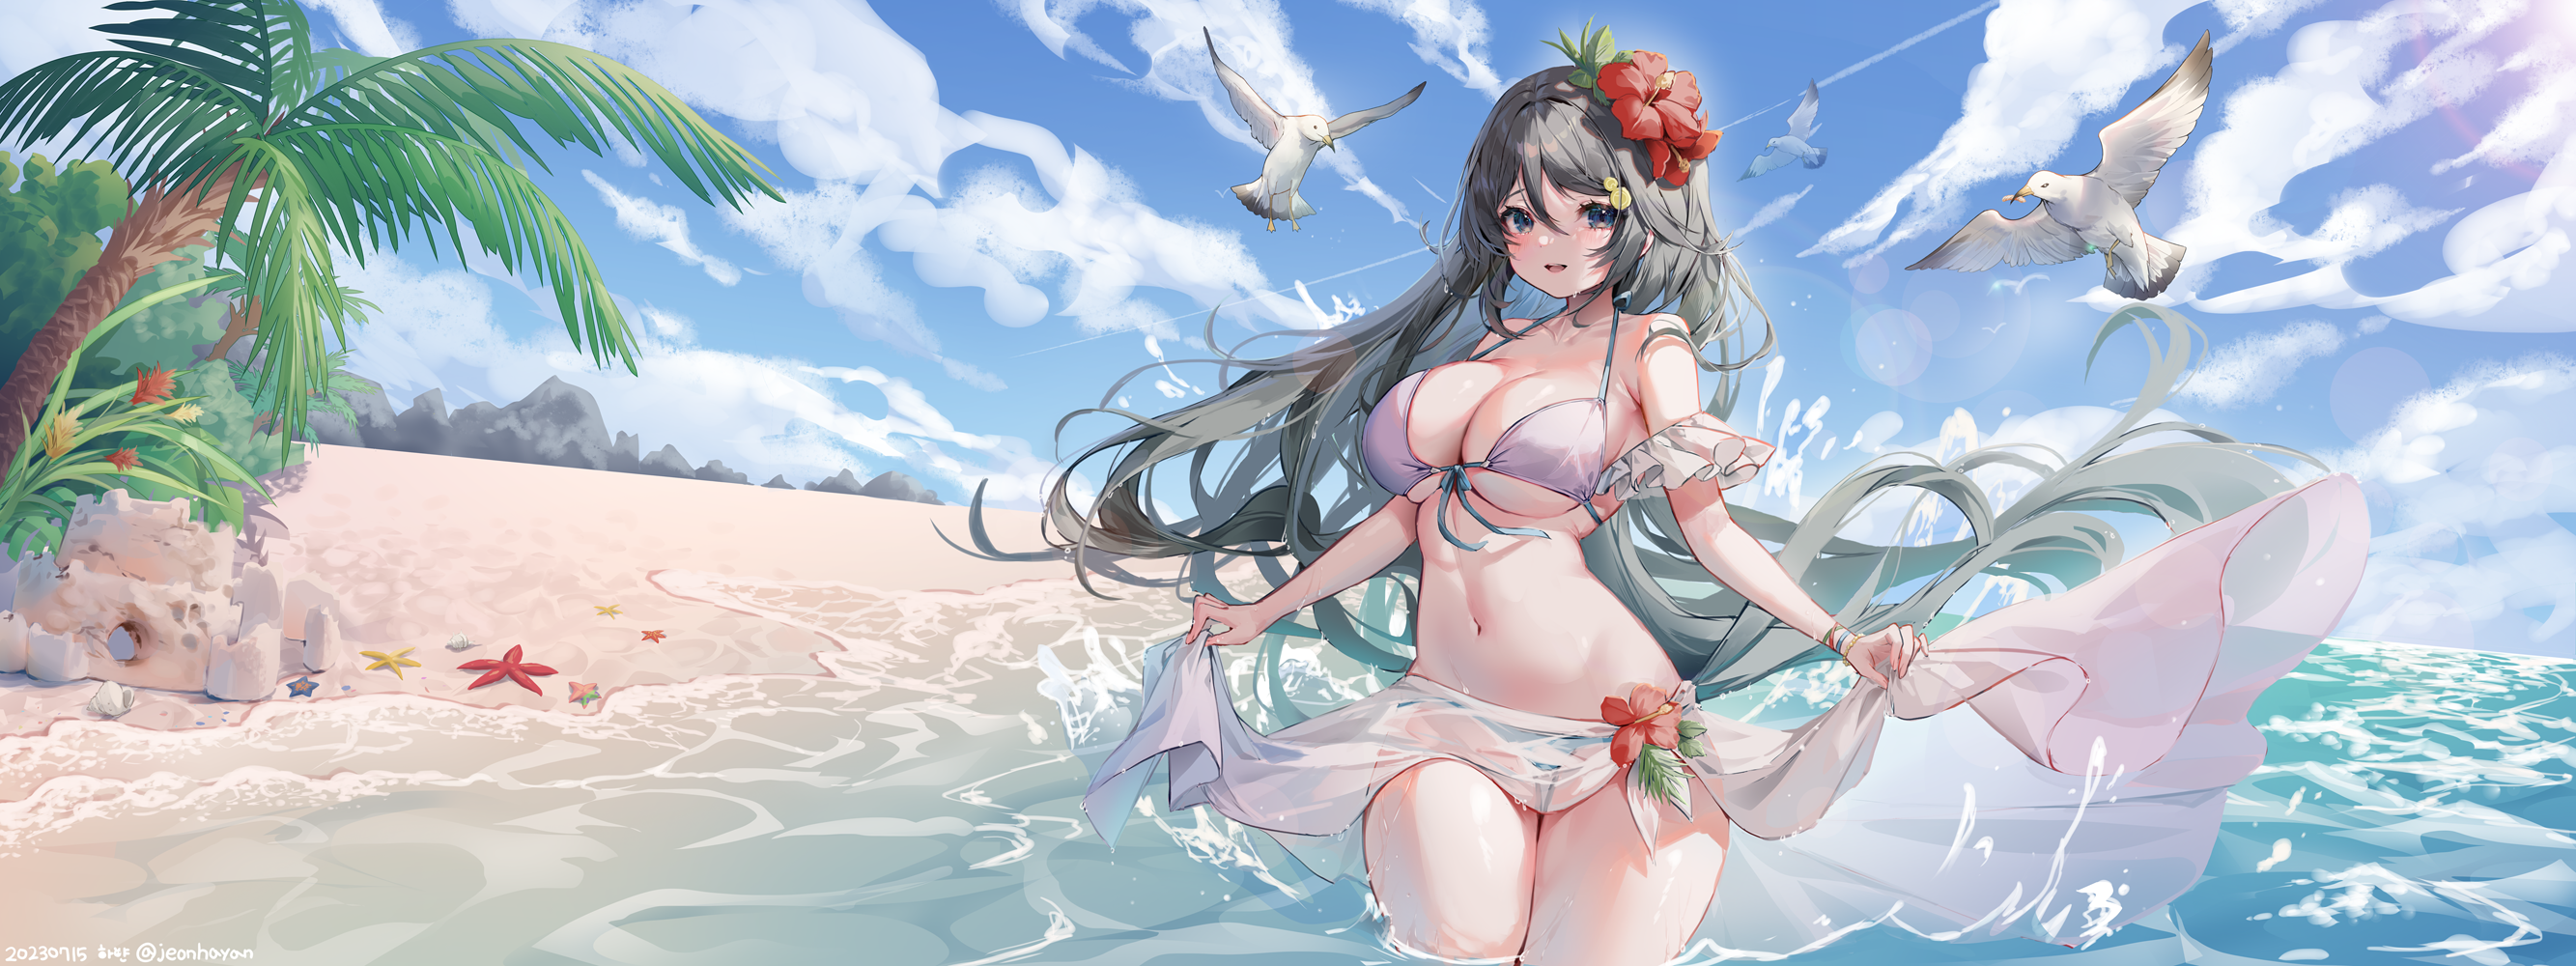 Anime 2667x1000 anime girls swimwear beach standing in water palm trees white bikini black hair blue eyes hibiscus flower in hair looking at viewer water animals sand castle seagulls hair ornament water drops big boobs lifting clothes outdoors open mouth long hair Shiro Albino sarong starfish sand sculpture smiling women outdoors blushing red flowers cleavage seashells horizon string bikini clouds birds wet leaves sunlight sky